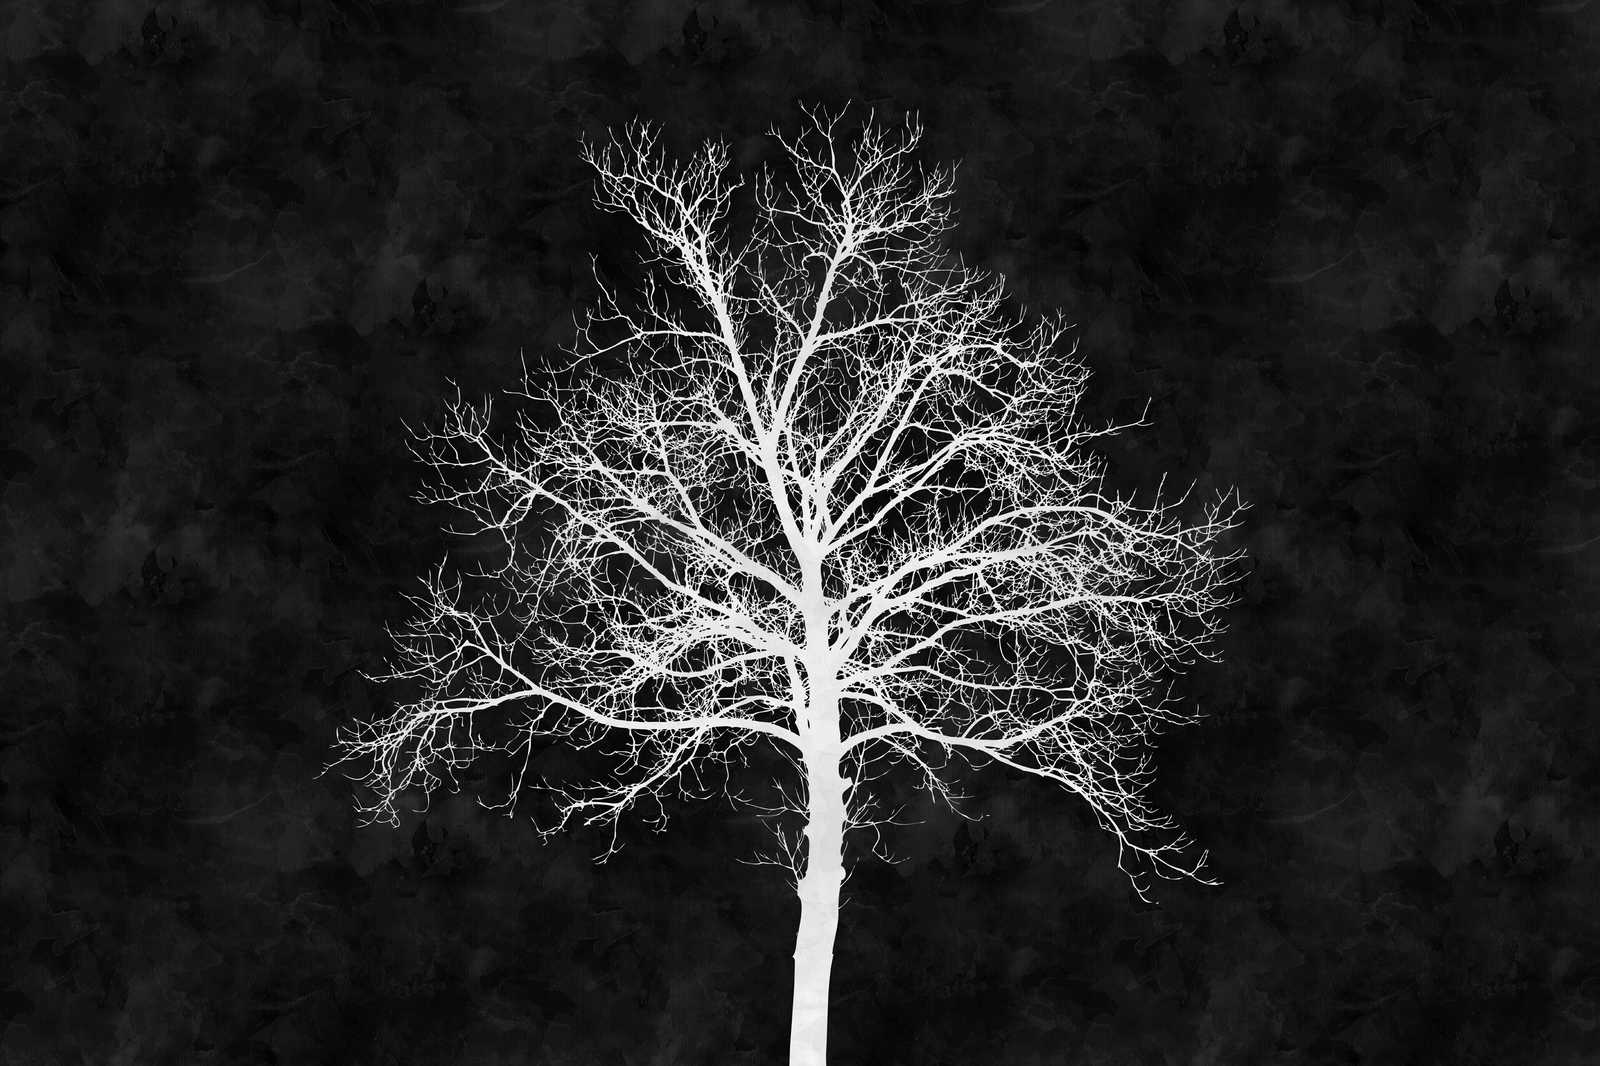             Black and White Canvas Painting White Tree - 0.90 m x 0.60 m
        